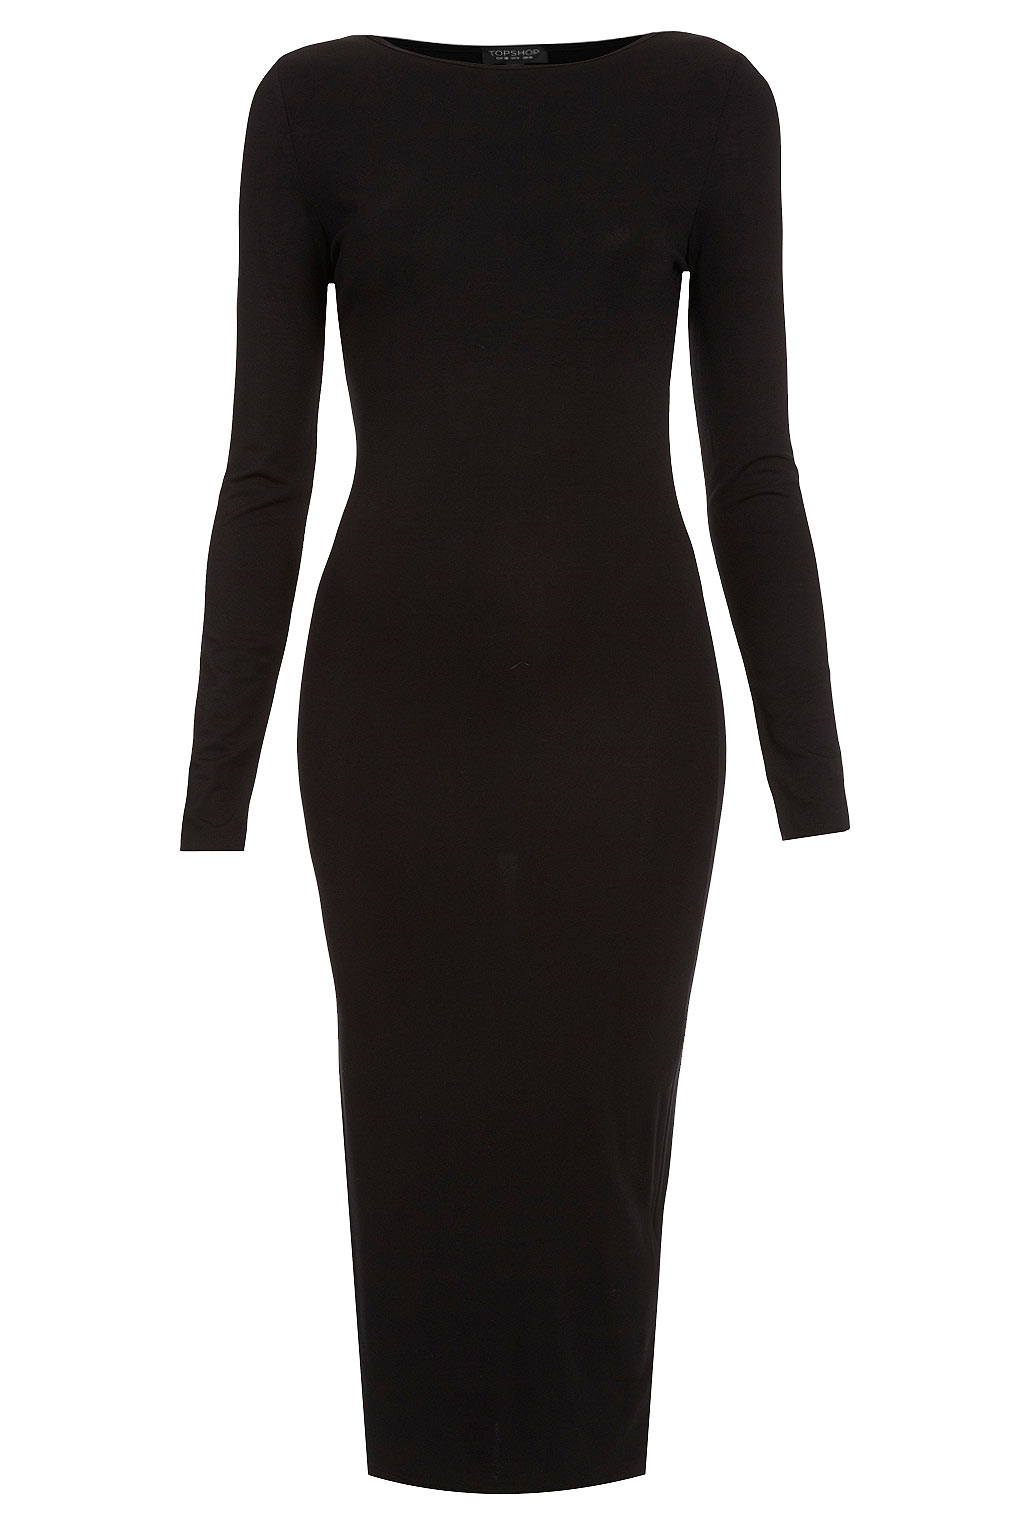 Richland topshop bodycon dress long sleeve midi and retail stores